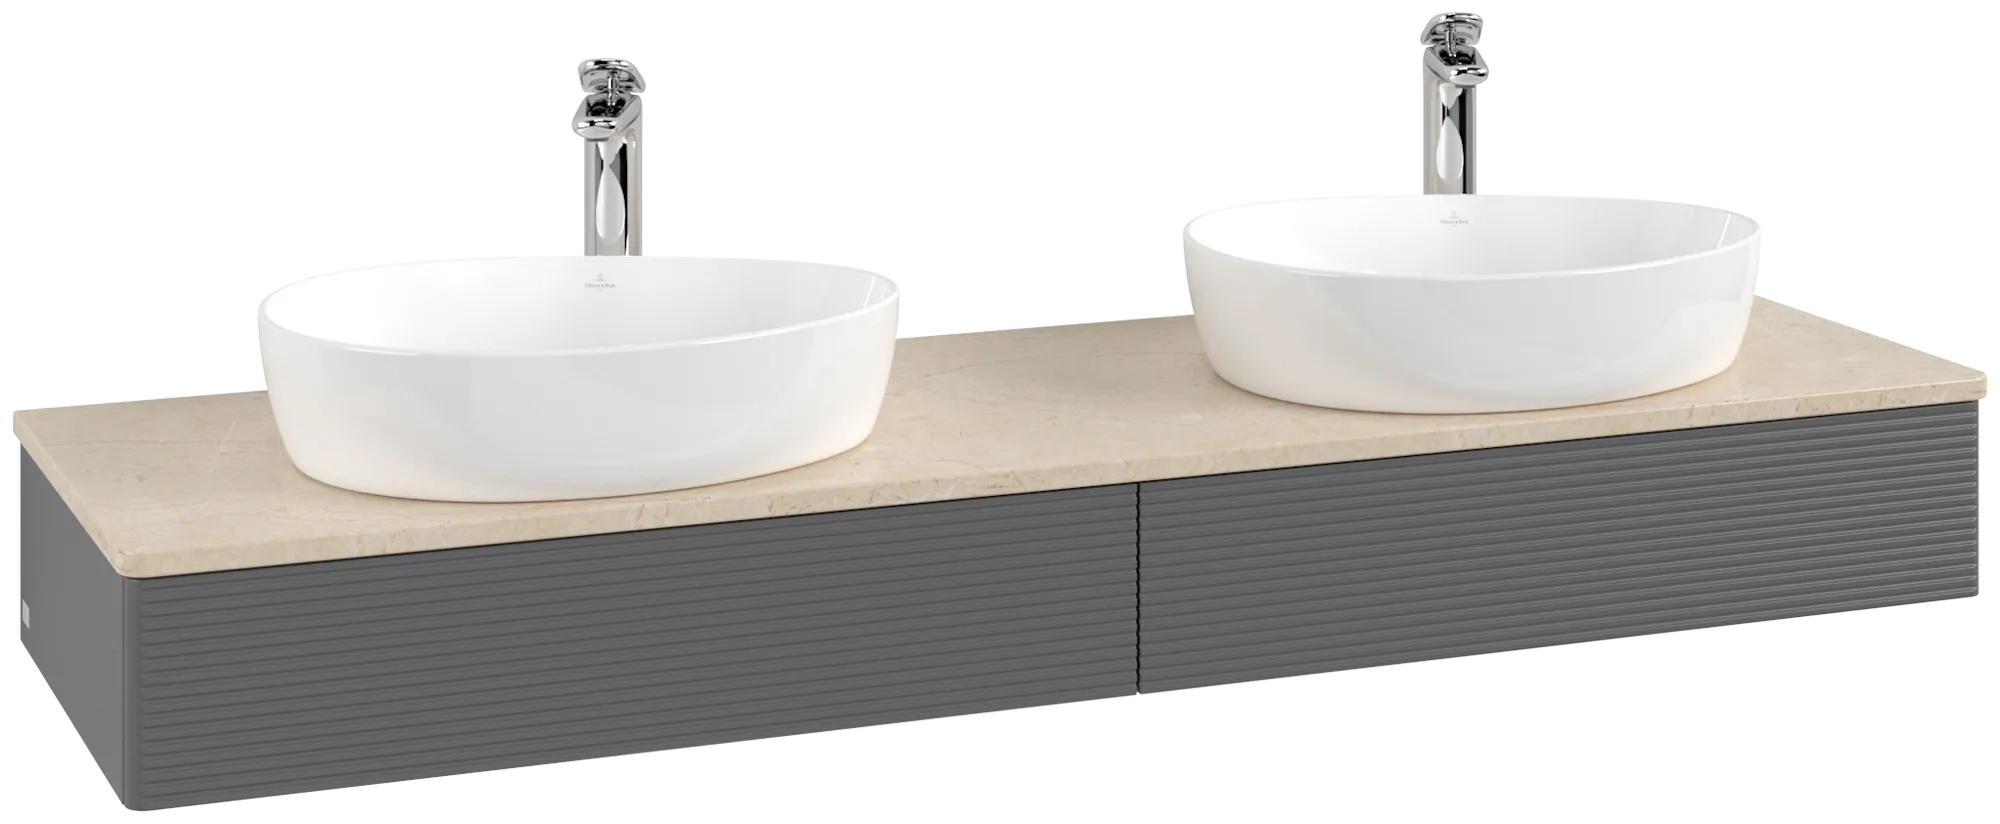 Picture of VILLEROY BOCH Antao Vanity unit, with lighting, 2 pull-out compartments, 1600 x 190 x 500 mm, Front with grain texture, Anthracite Matt Lacquer / Botticino #L17153GK